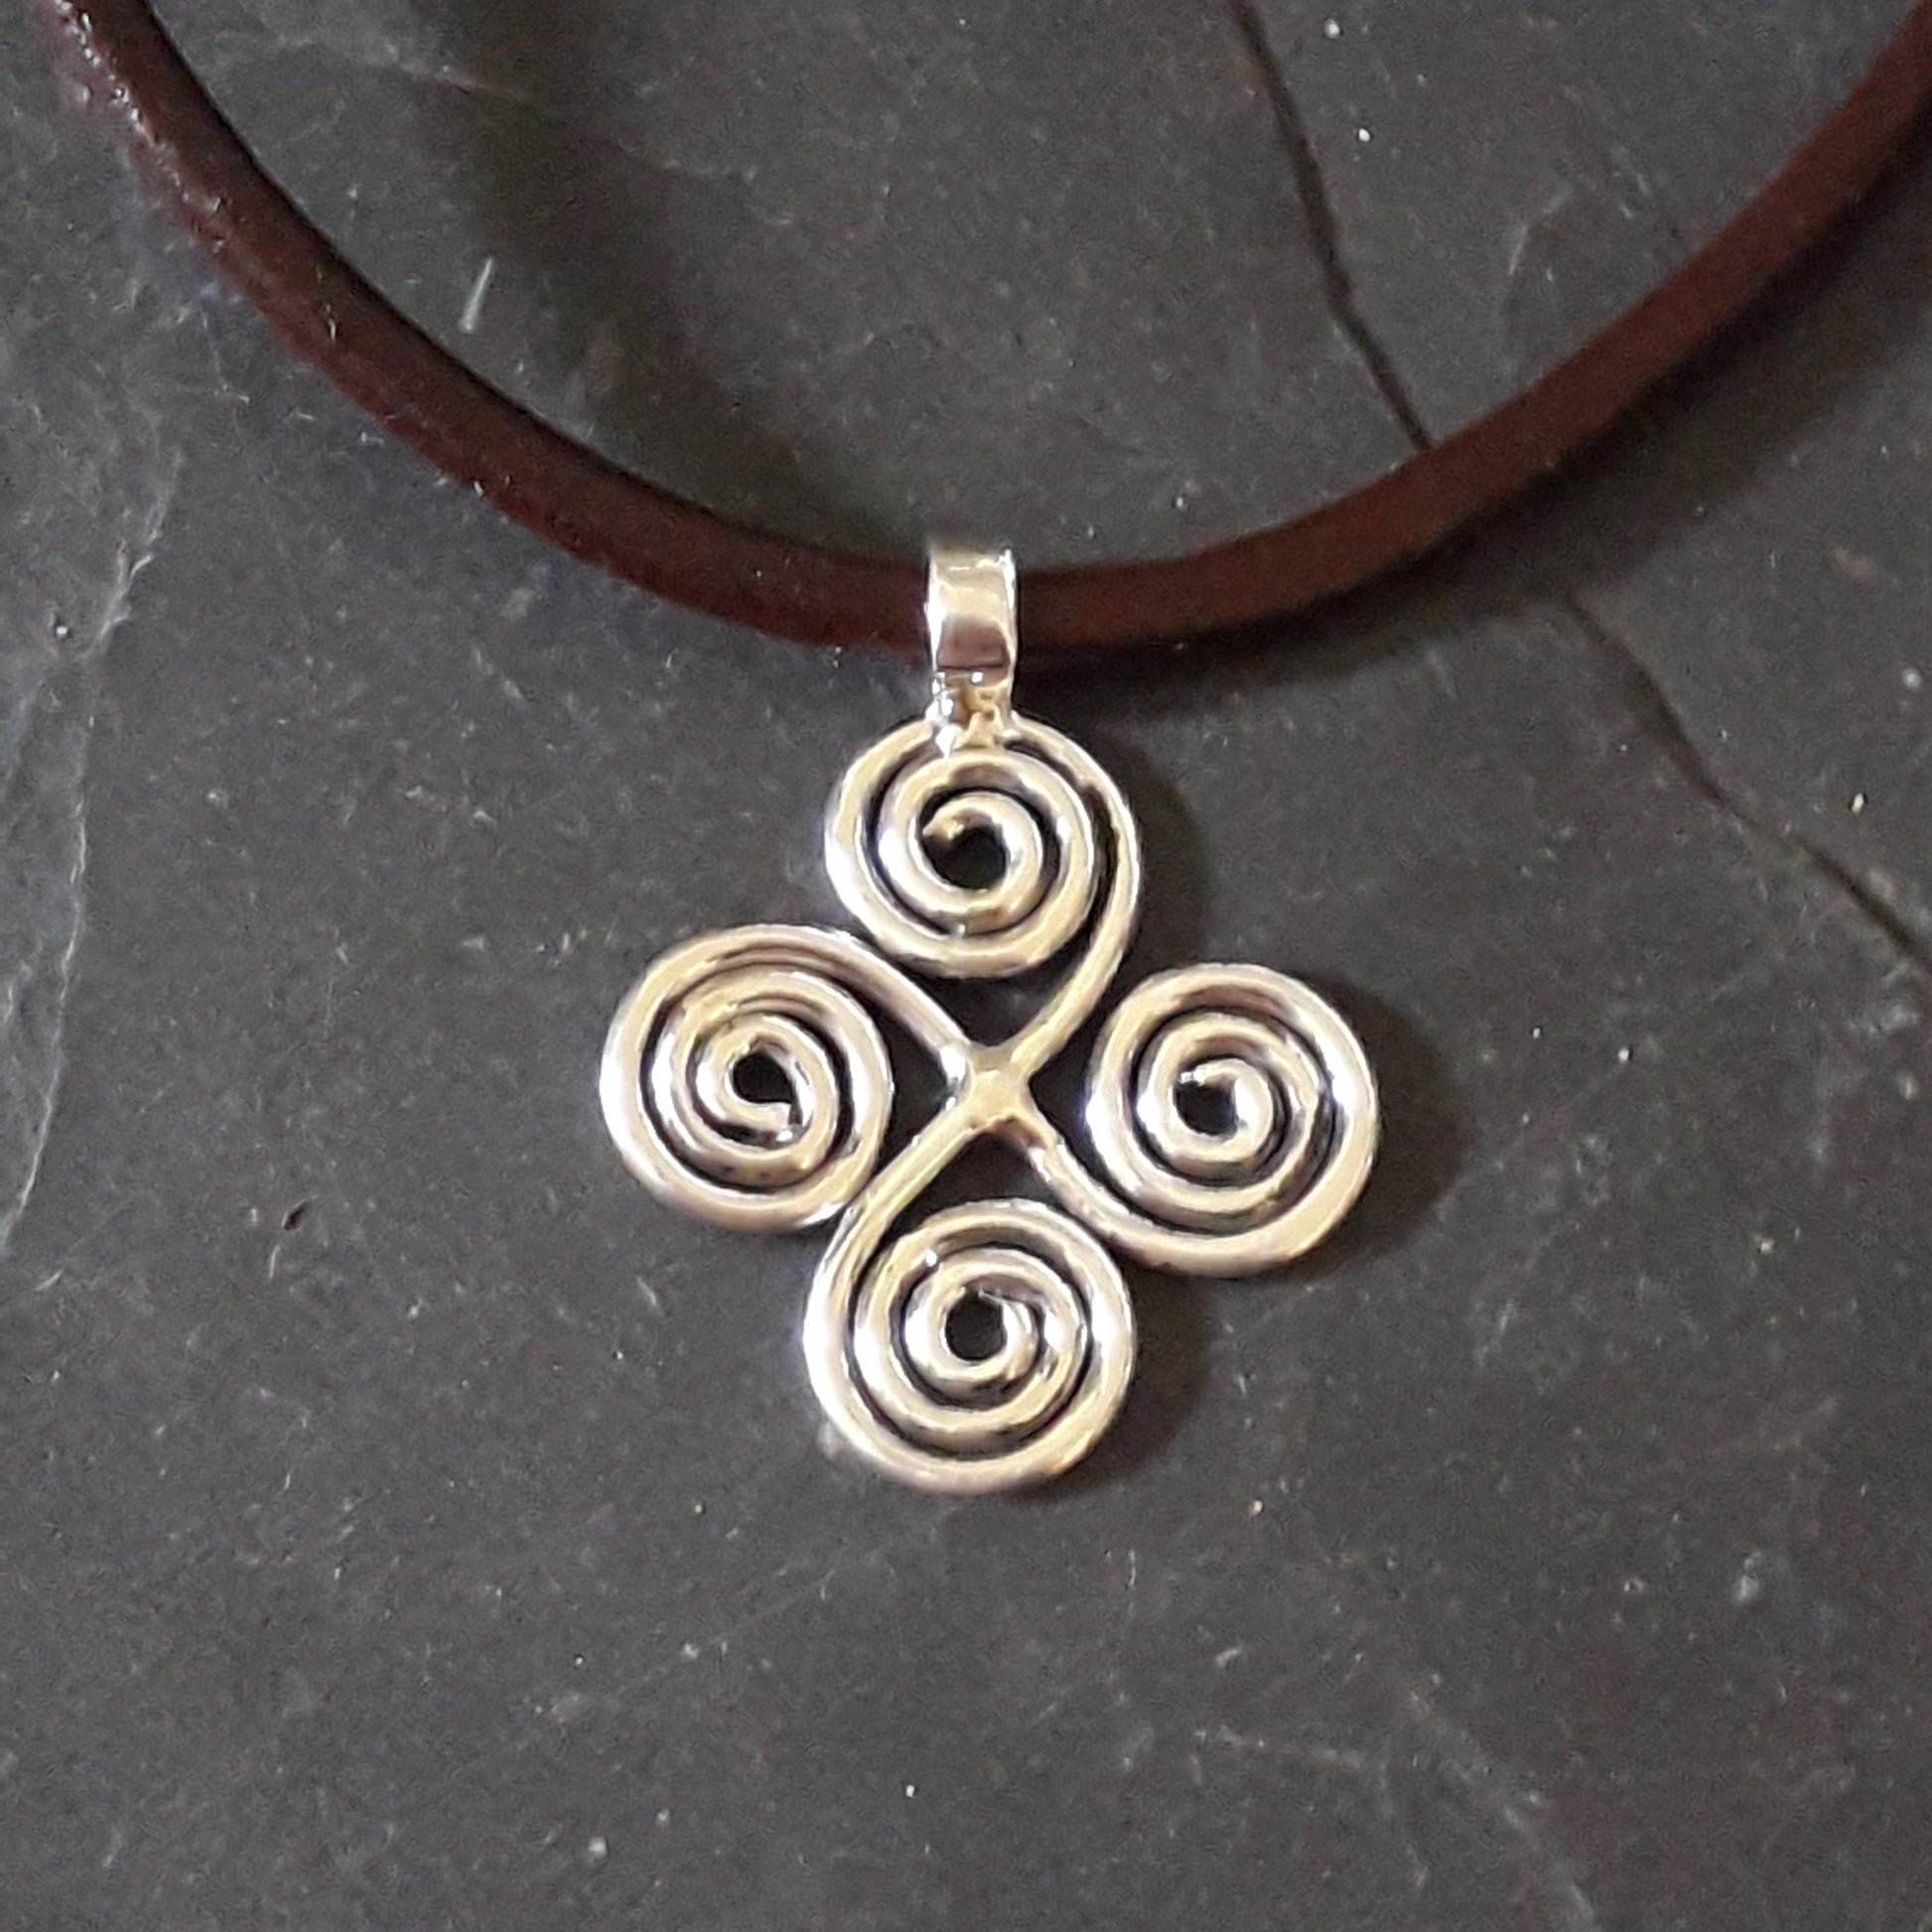 Celtic silver pendant on brown leather